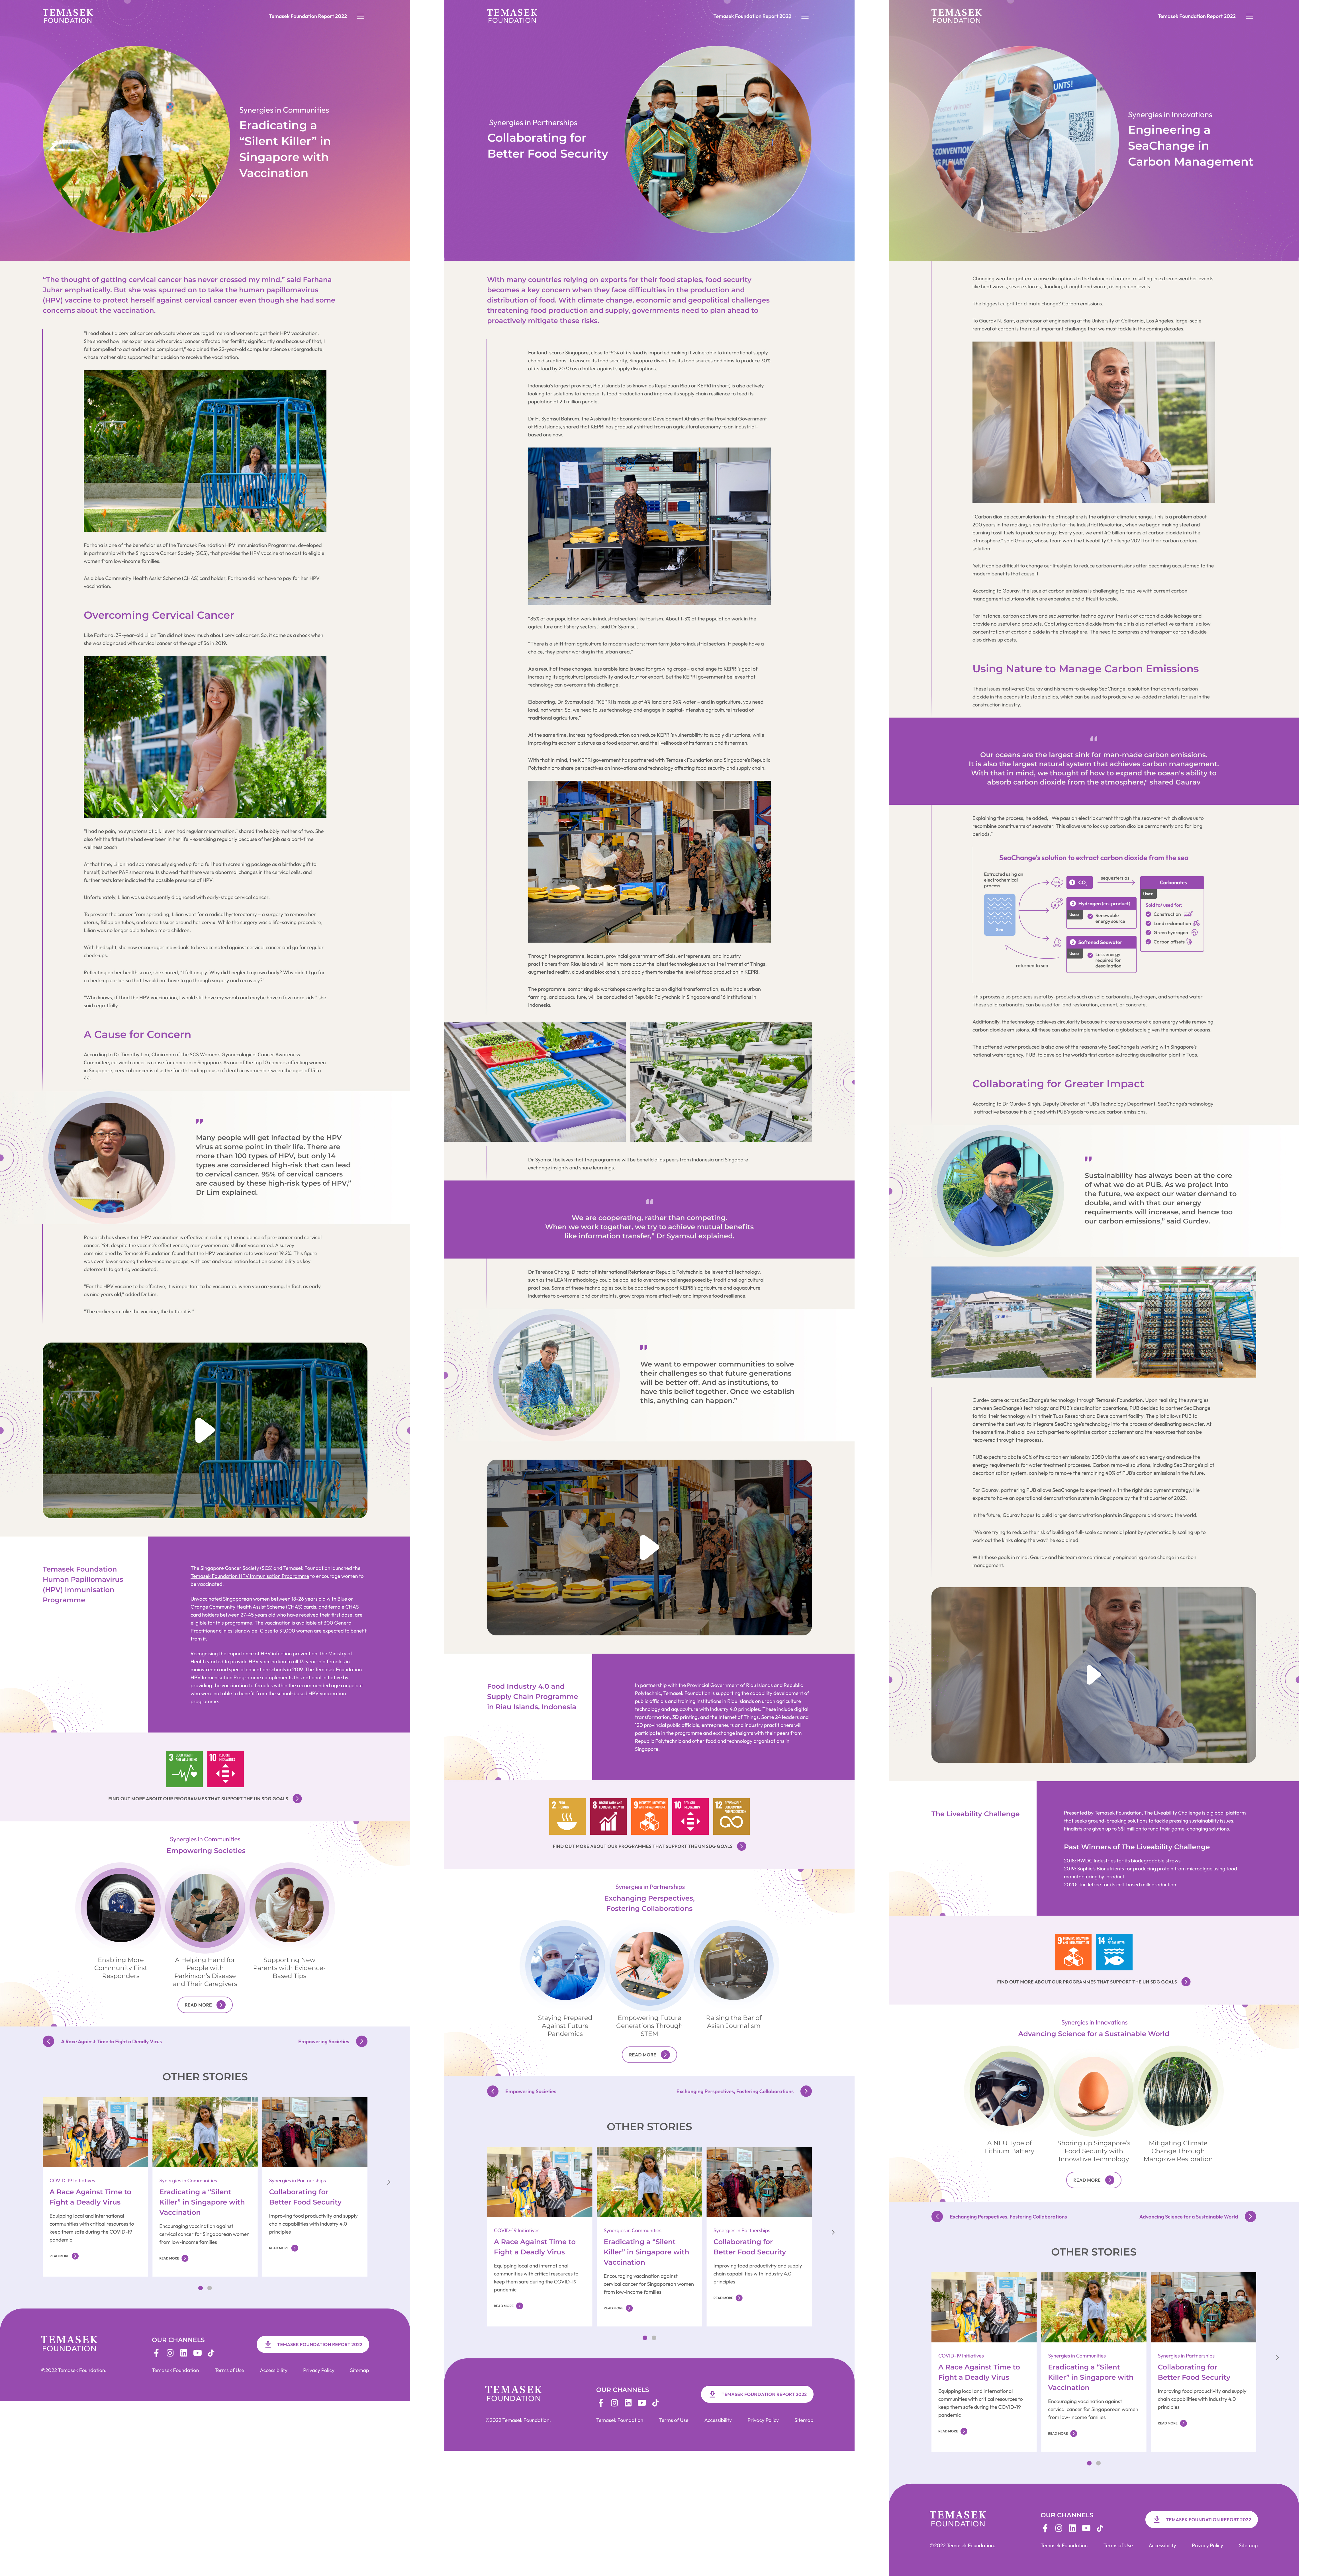 All the main story pages have a consistent structure: Main navigation, header, body, programme overview, link to Temasek Foundation’s Sustainable Development Goal and sidebar stories, pagination, story slider, and footer.